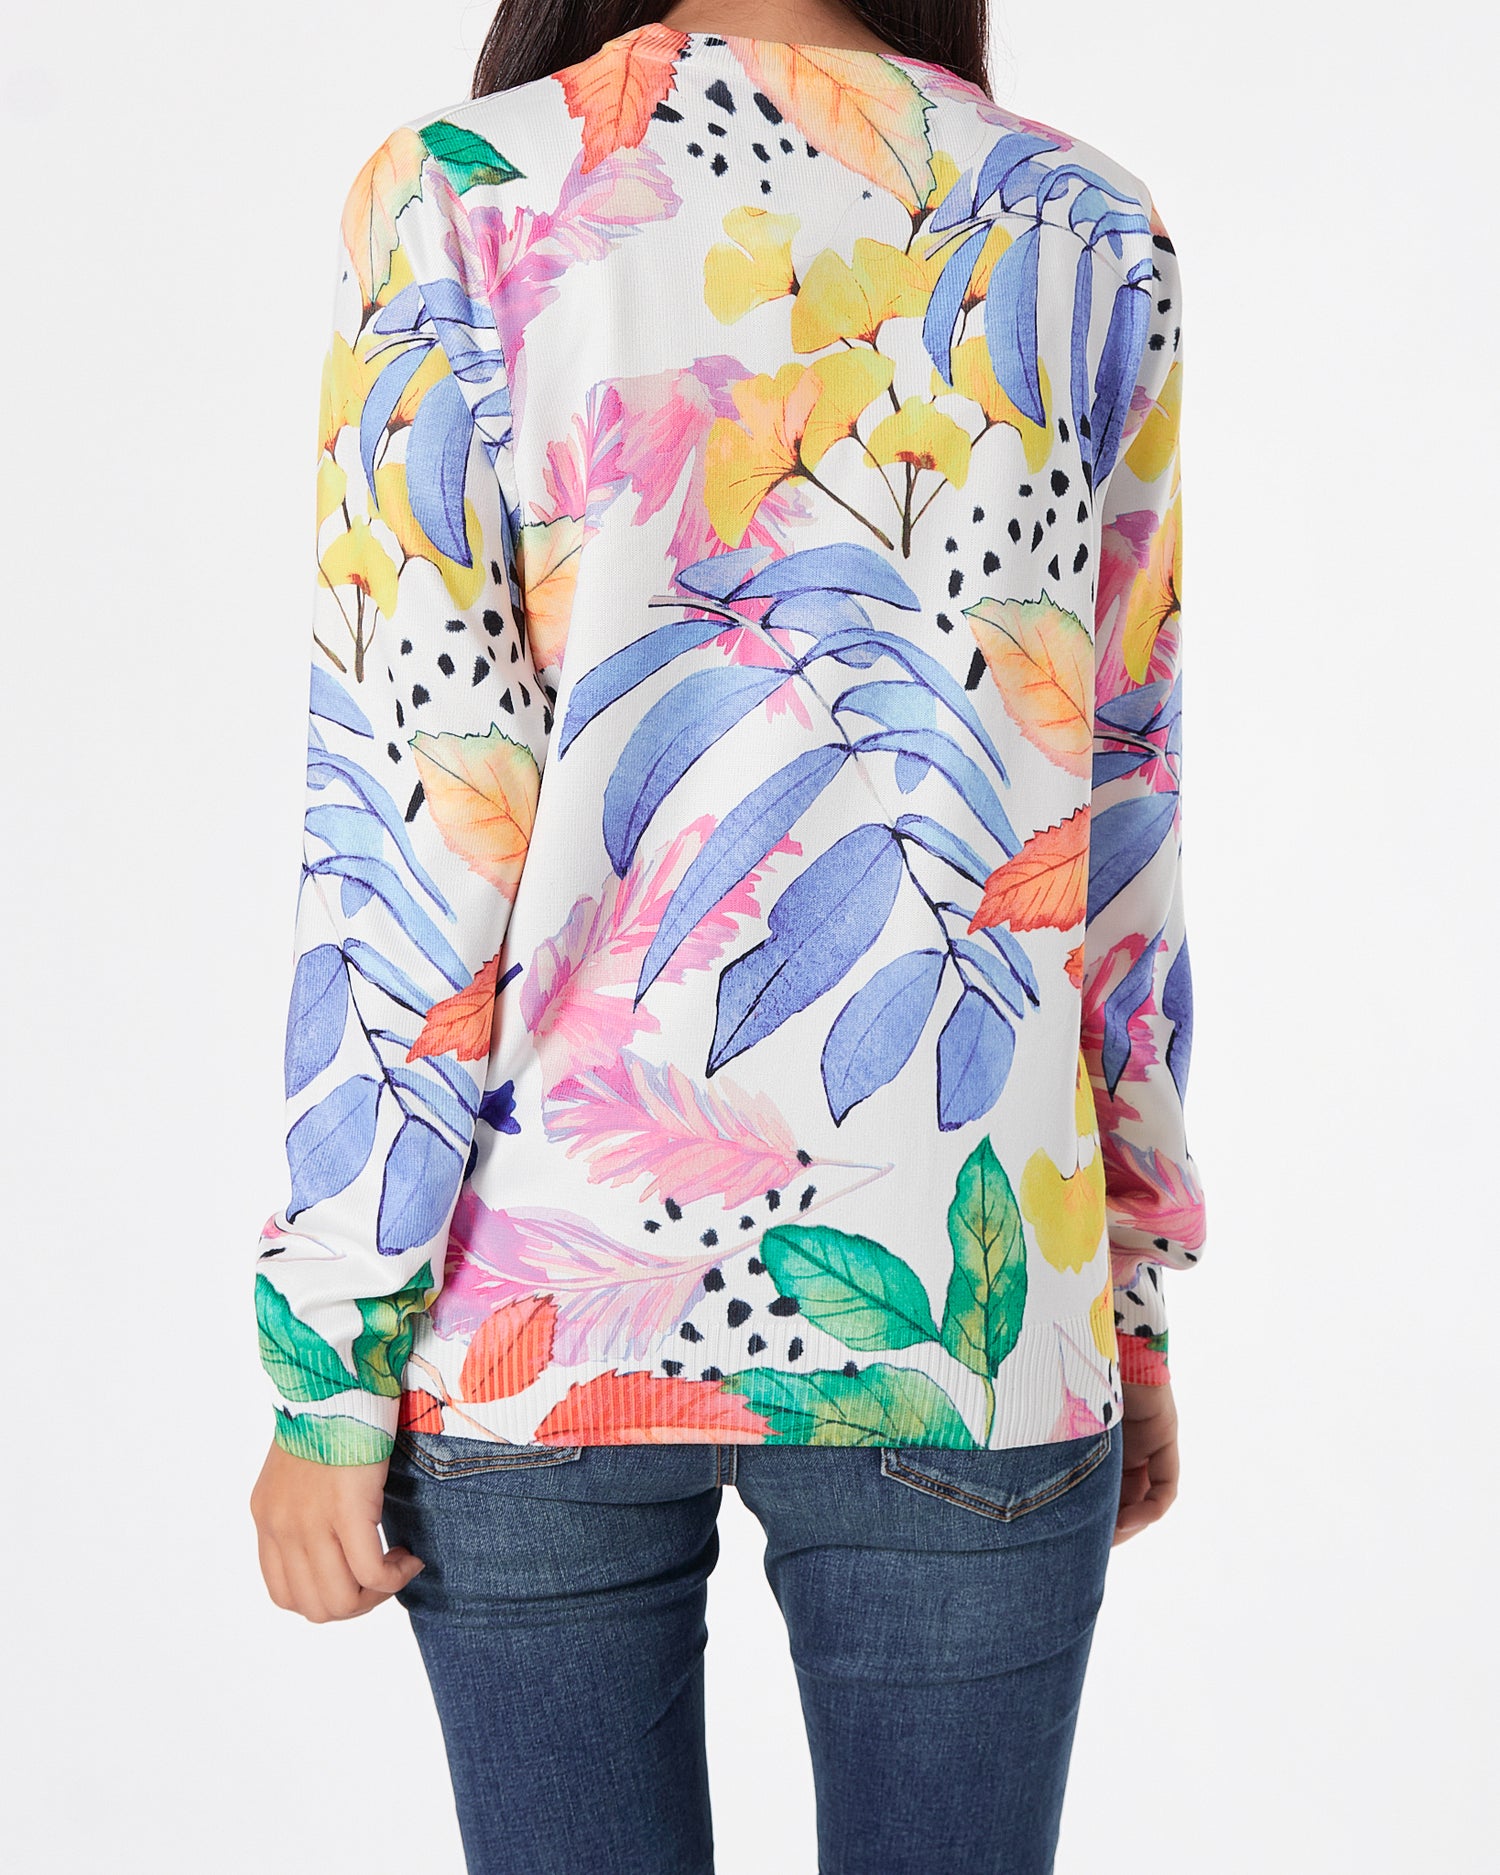 Floral Over Printed Lady  Sweater 22.90